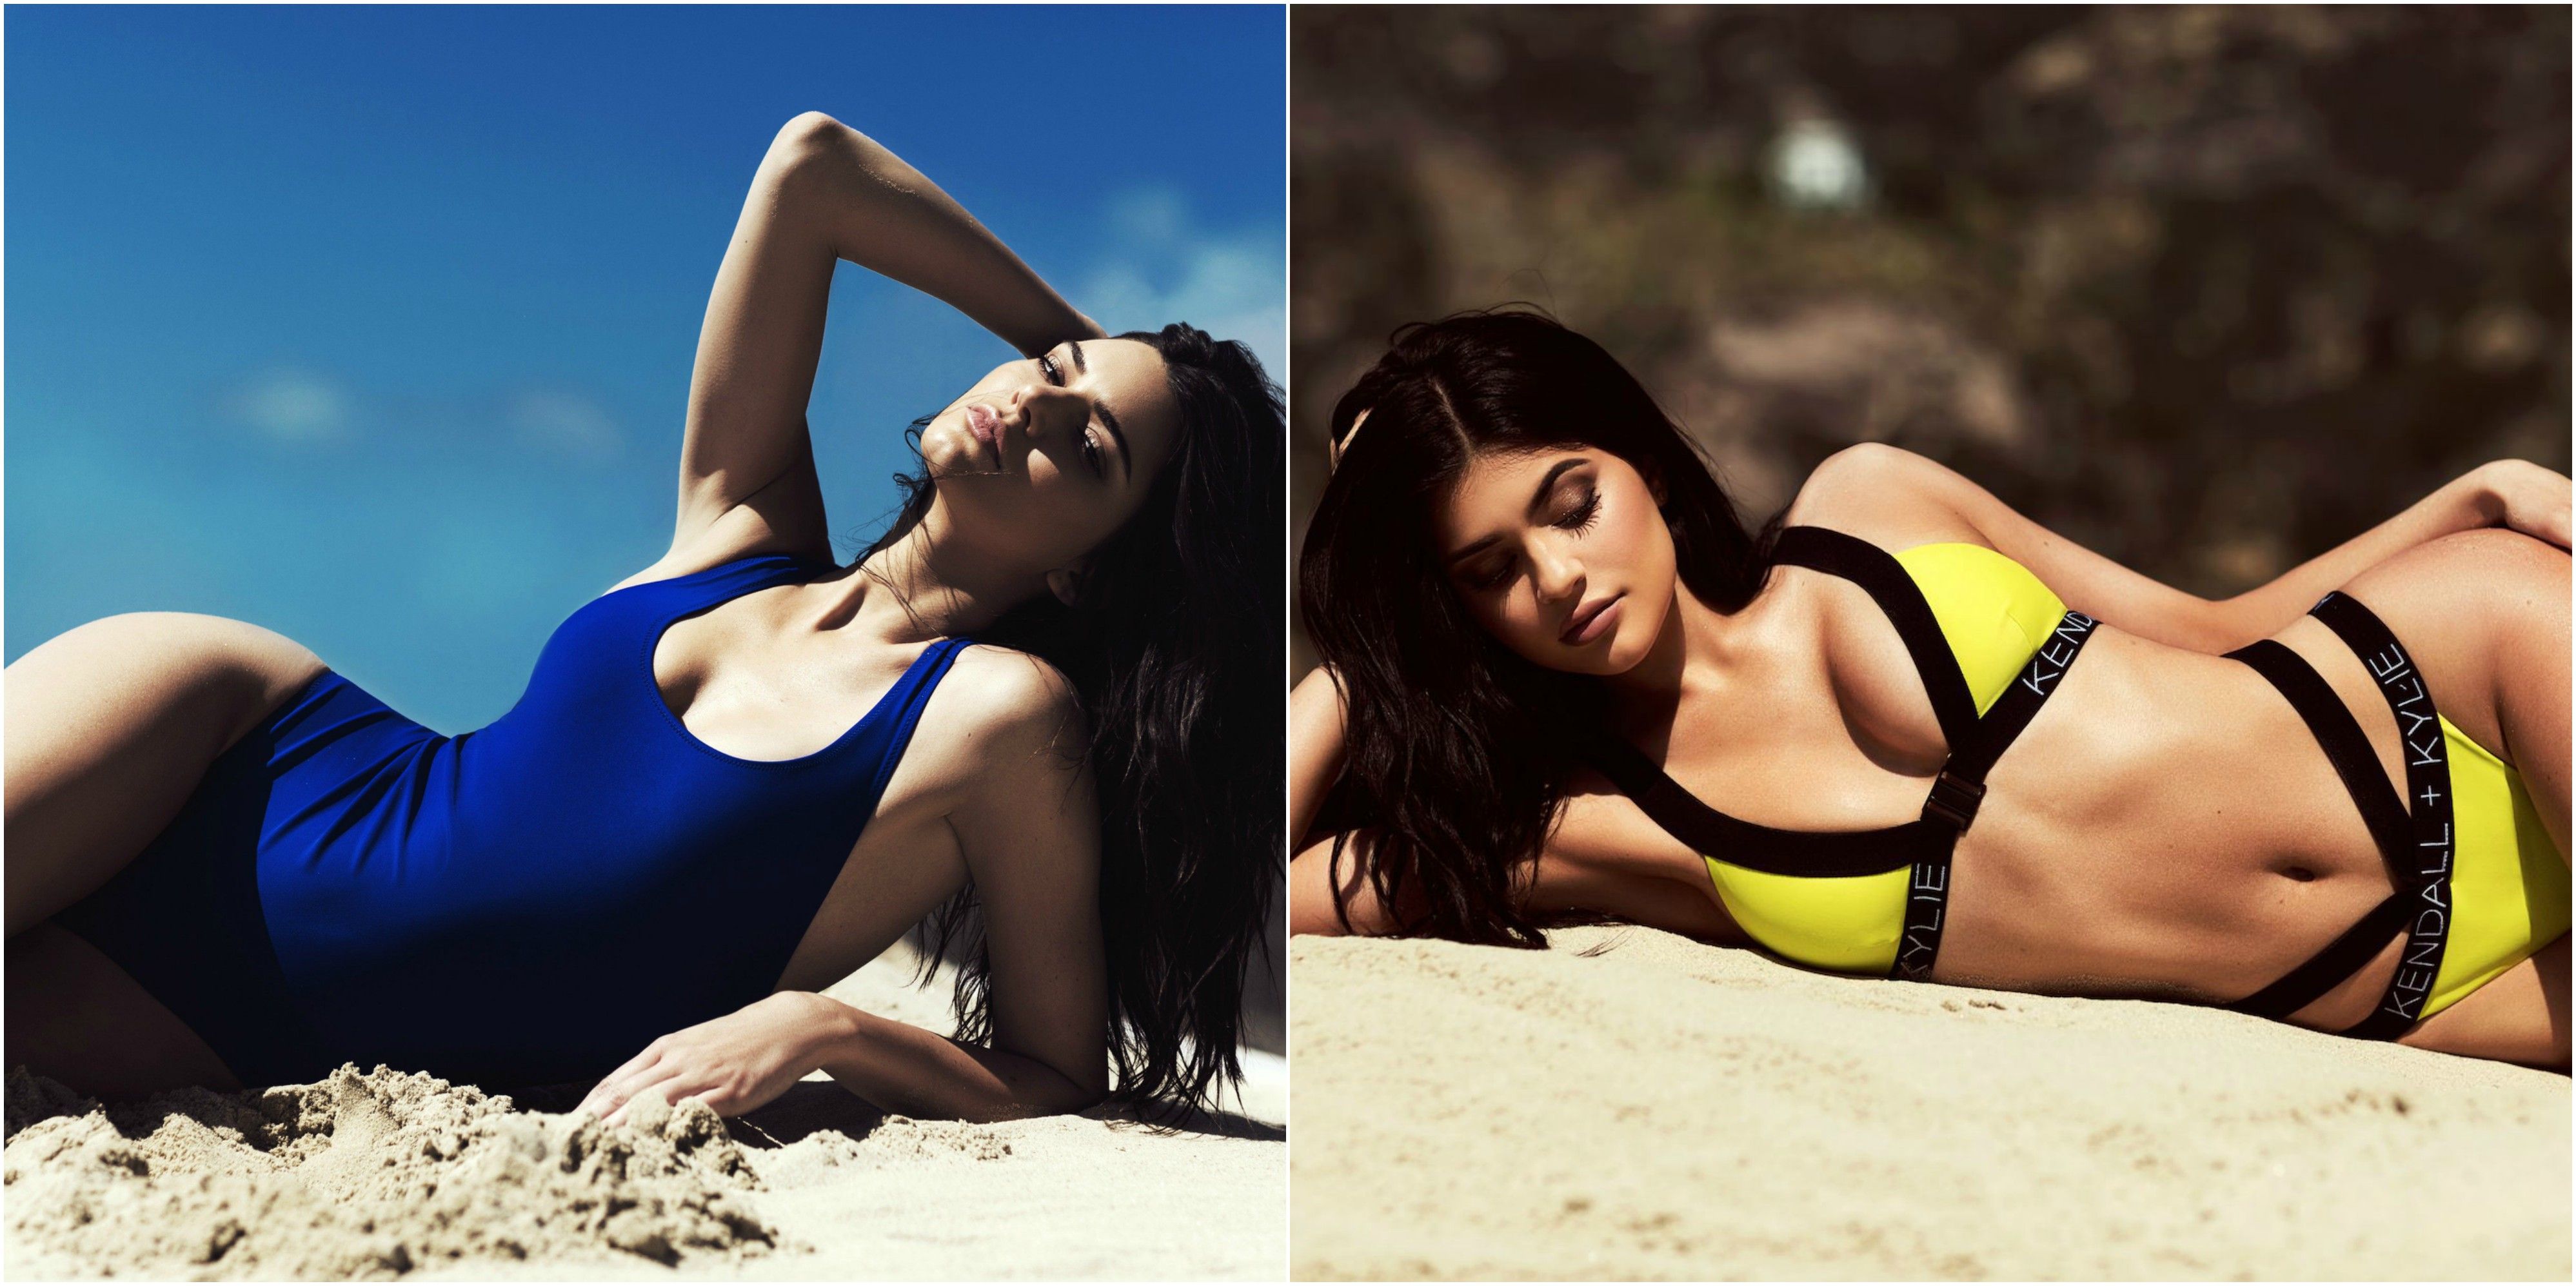 Fotos sexy de kendall jenner y kylie jenner
 #79639073